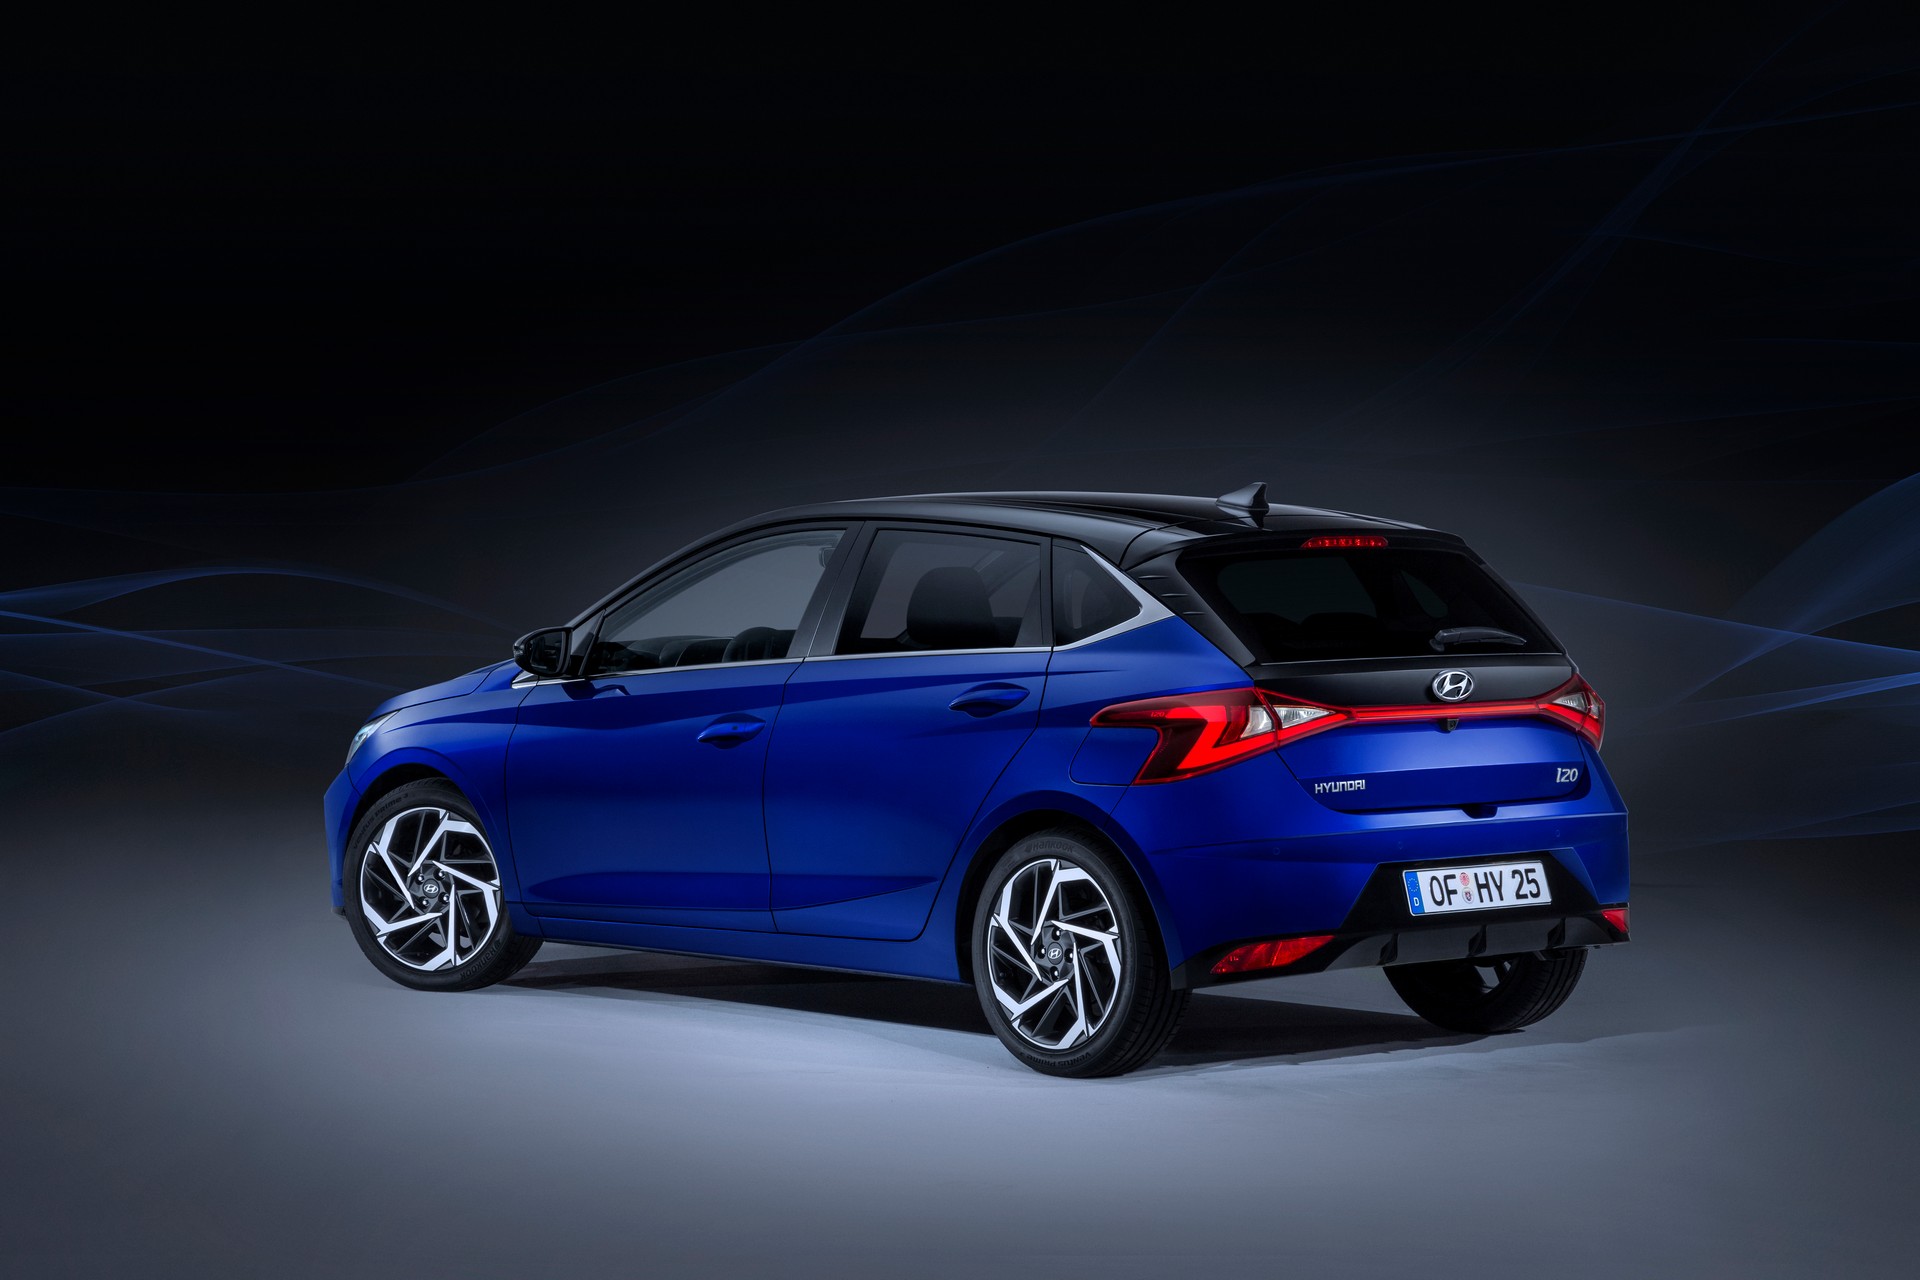 2020 Hyundai i20 Goes Official, Features New Mild Hybrid